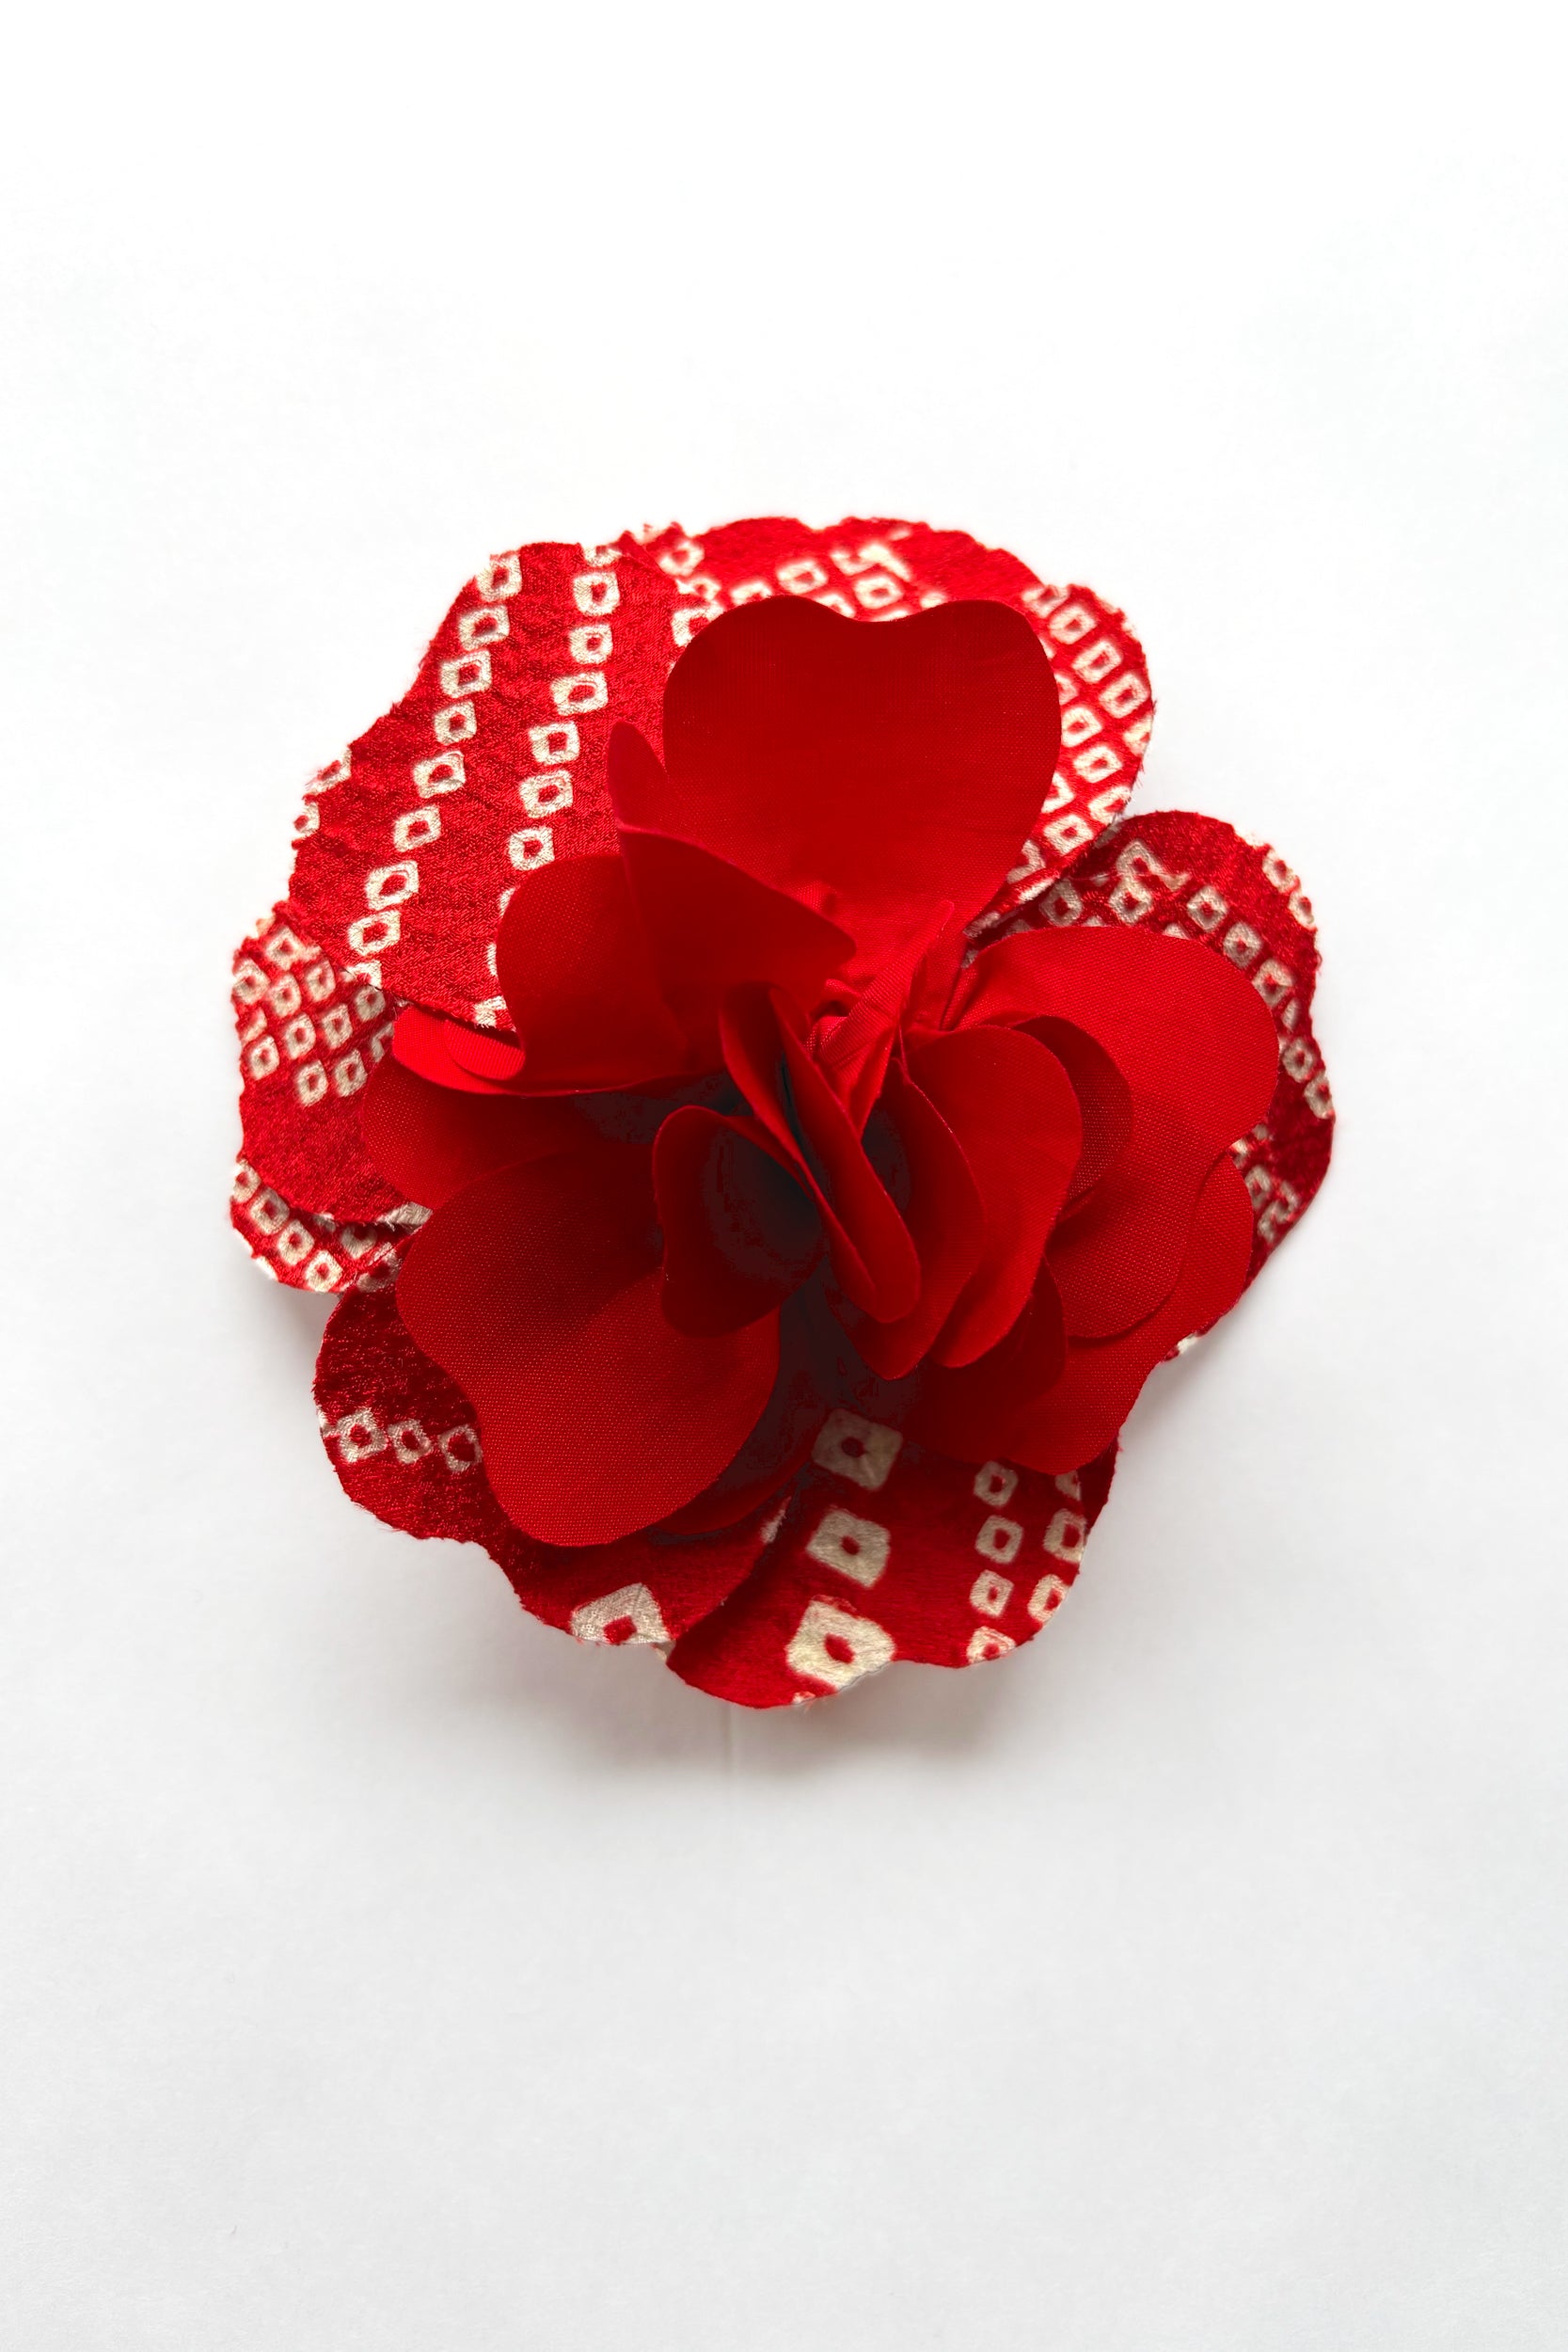 Red Peony Brooches in Vintage Japanese Fabrics